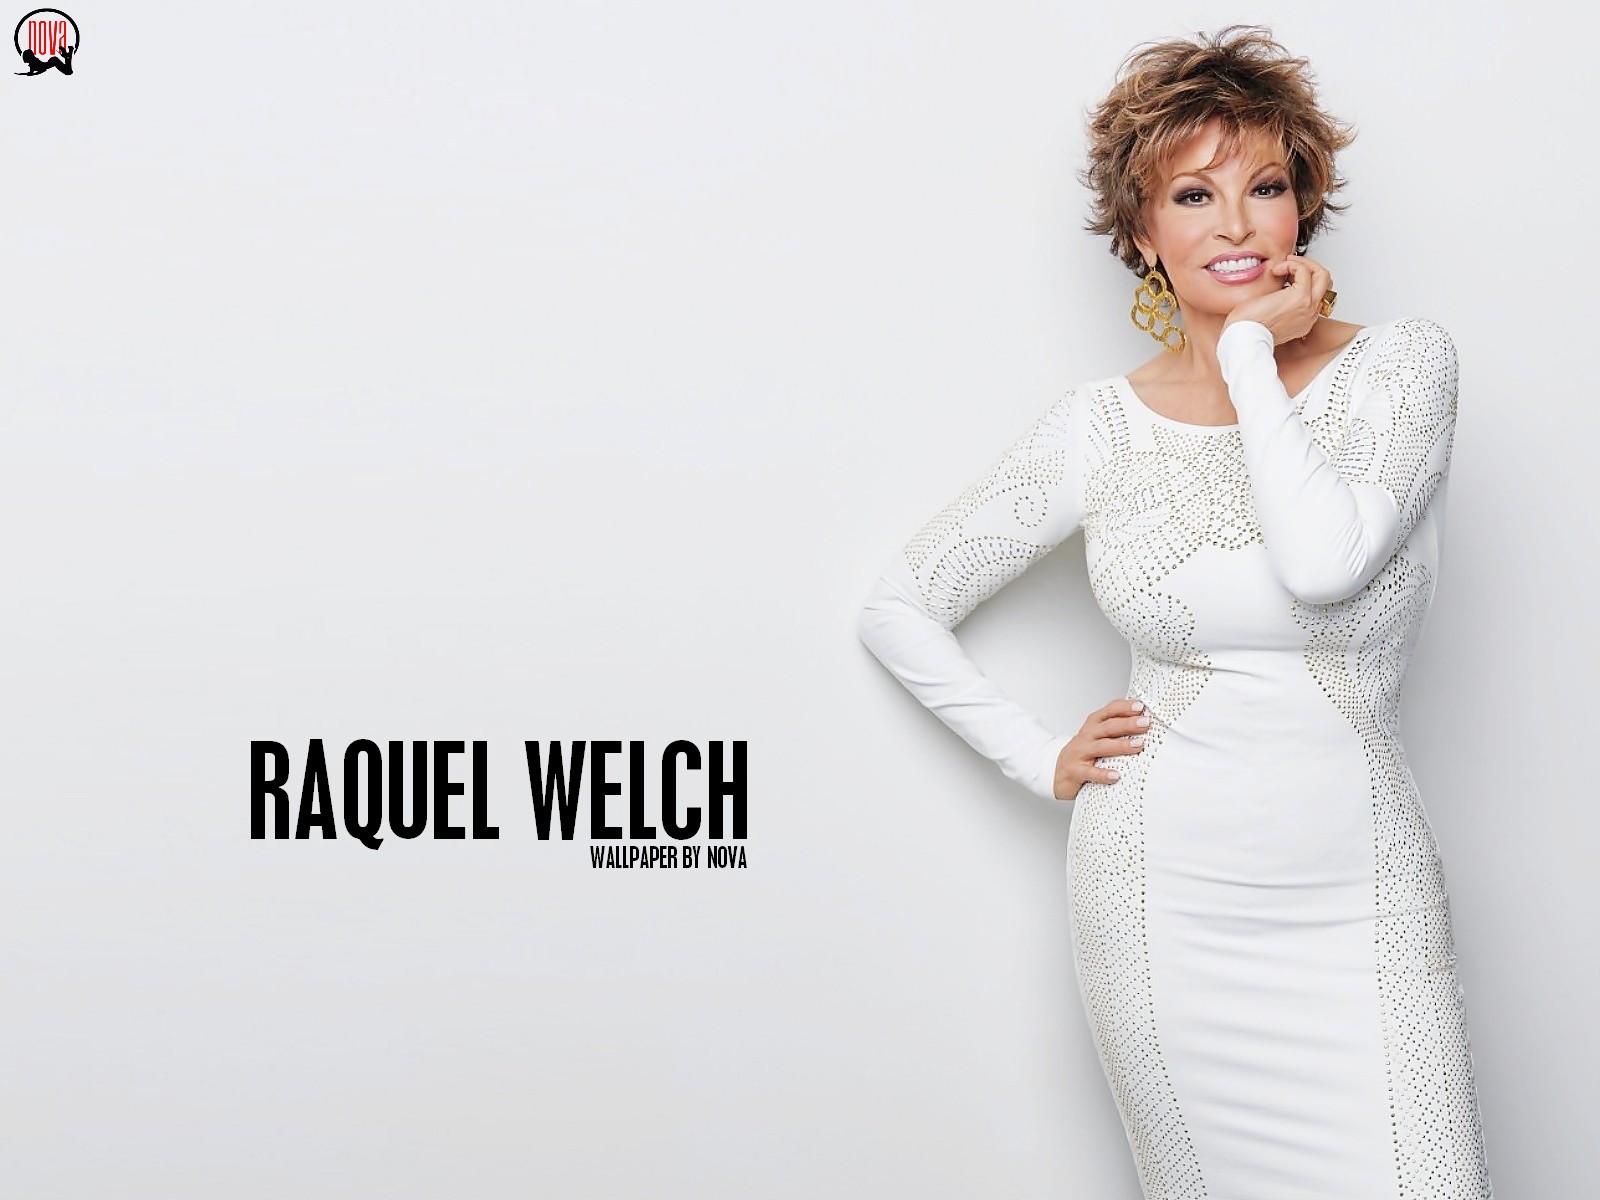 Raquel Welch Image HD Wallpaper And